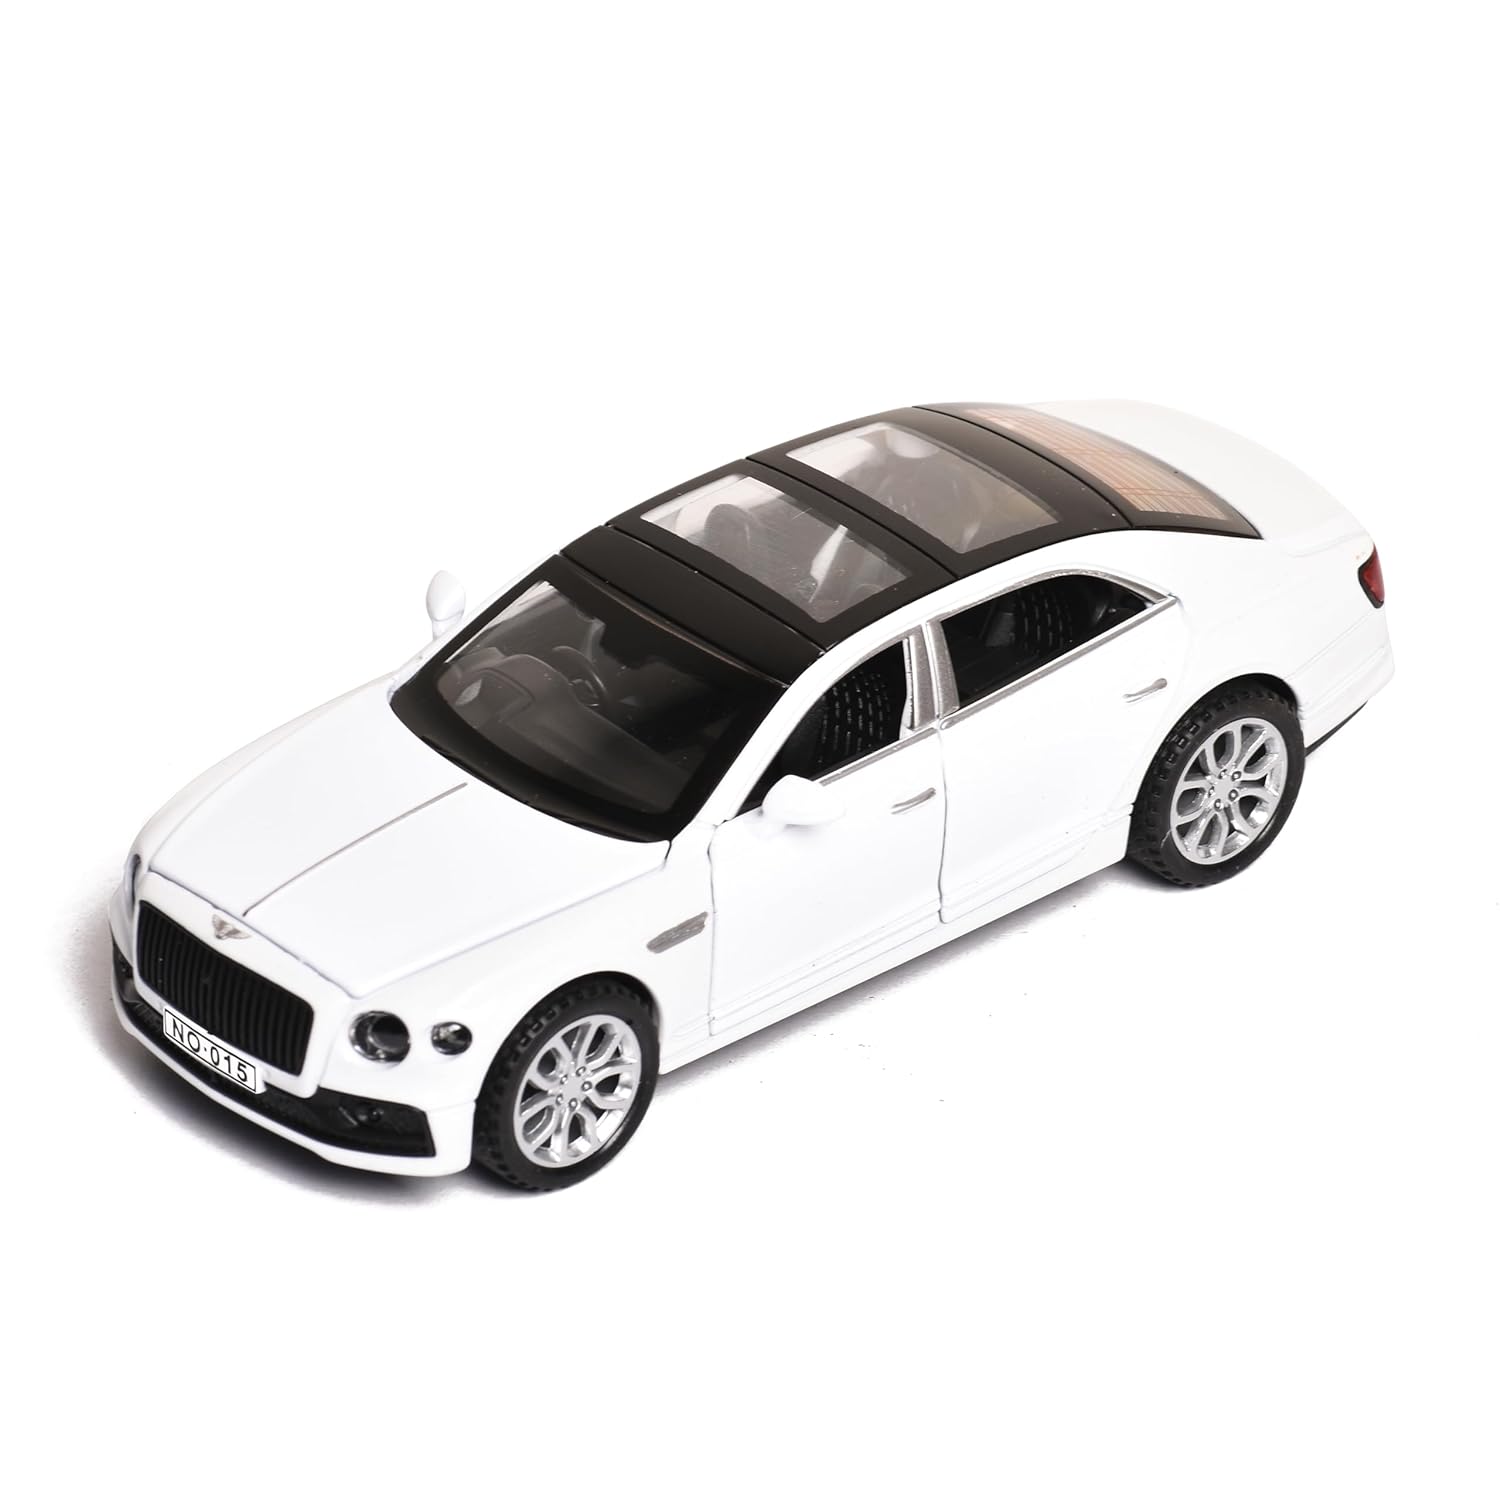 Braintastic Model Diecast Car Toy Vehicle Pull Back Friction Car with Openable Doors Light & Music Toys for Kids Age 3+ Years (AK Metal Series Bentley White)